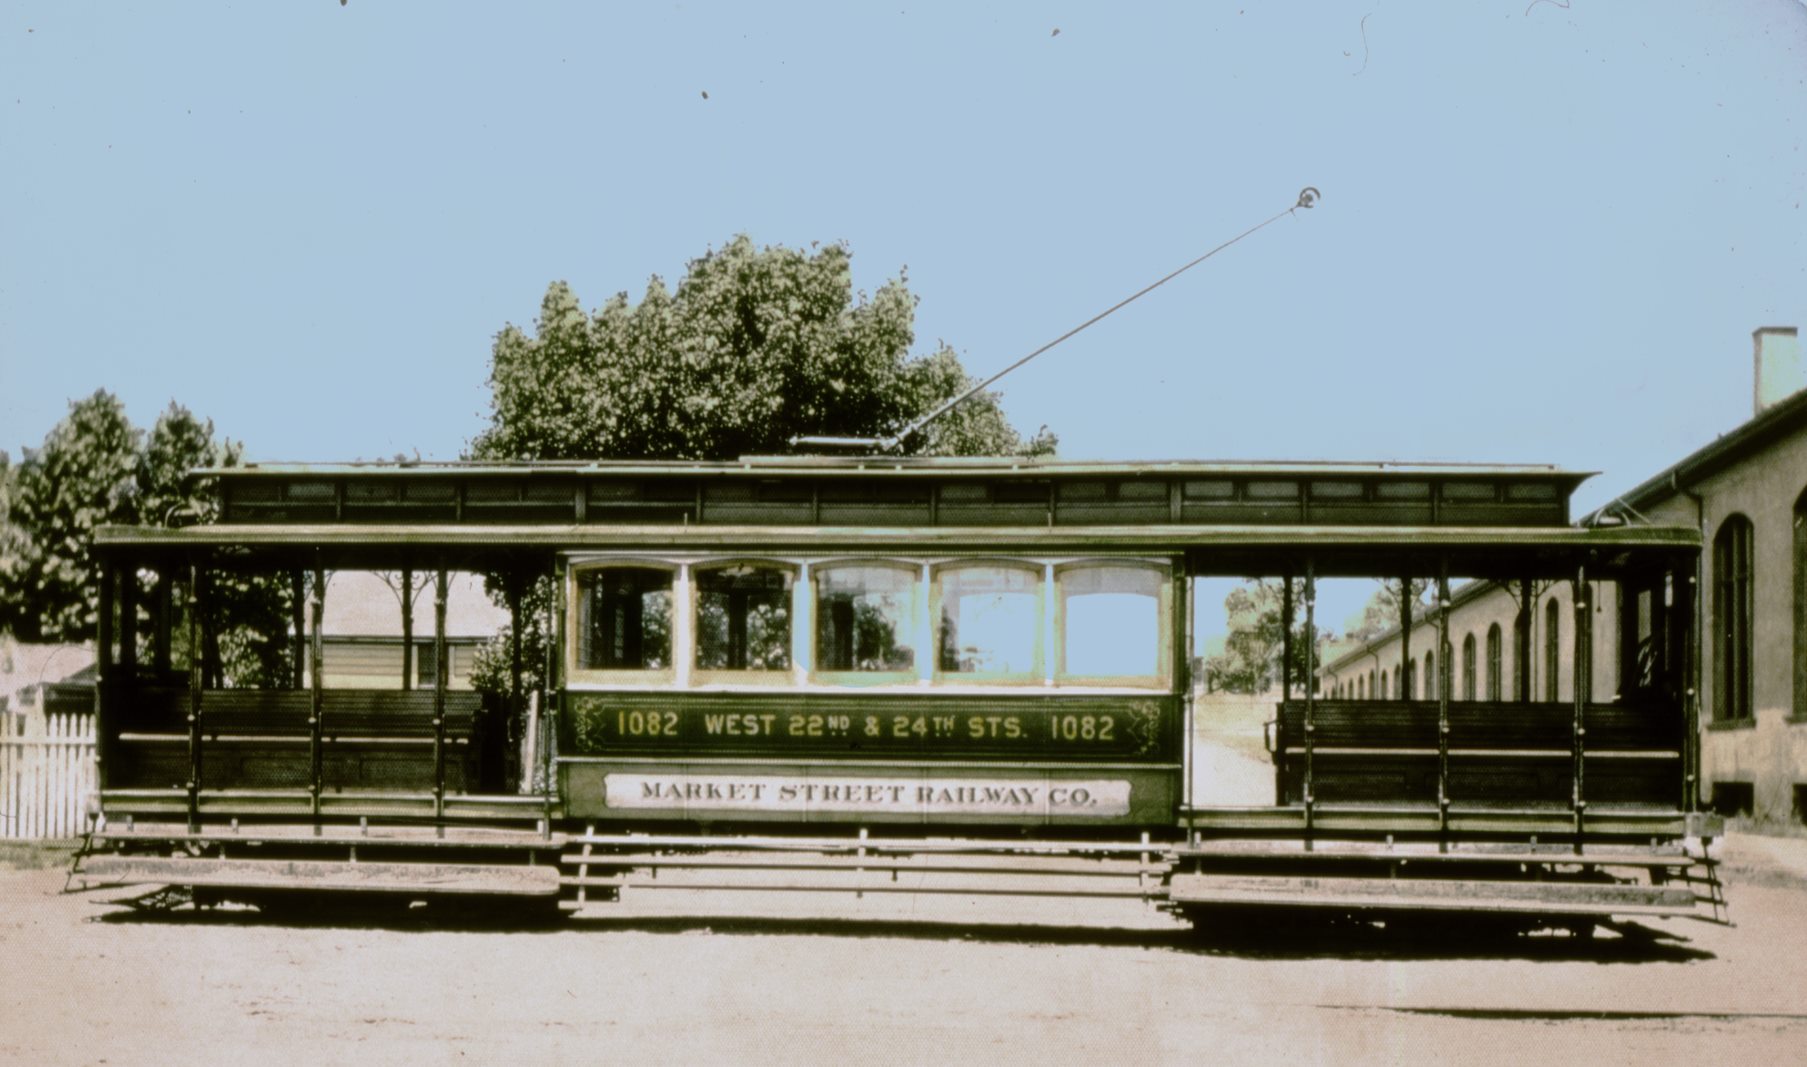 Car 1082 rebuilt from cable car